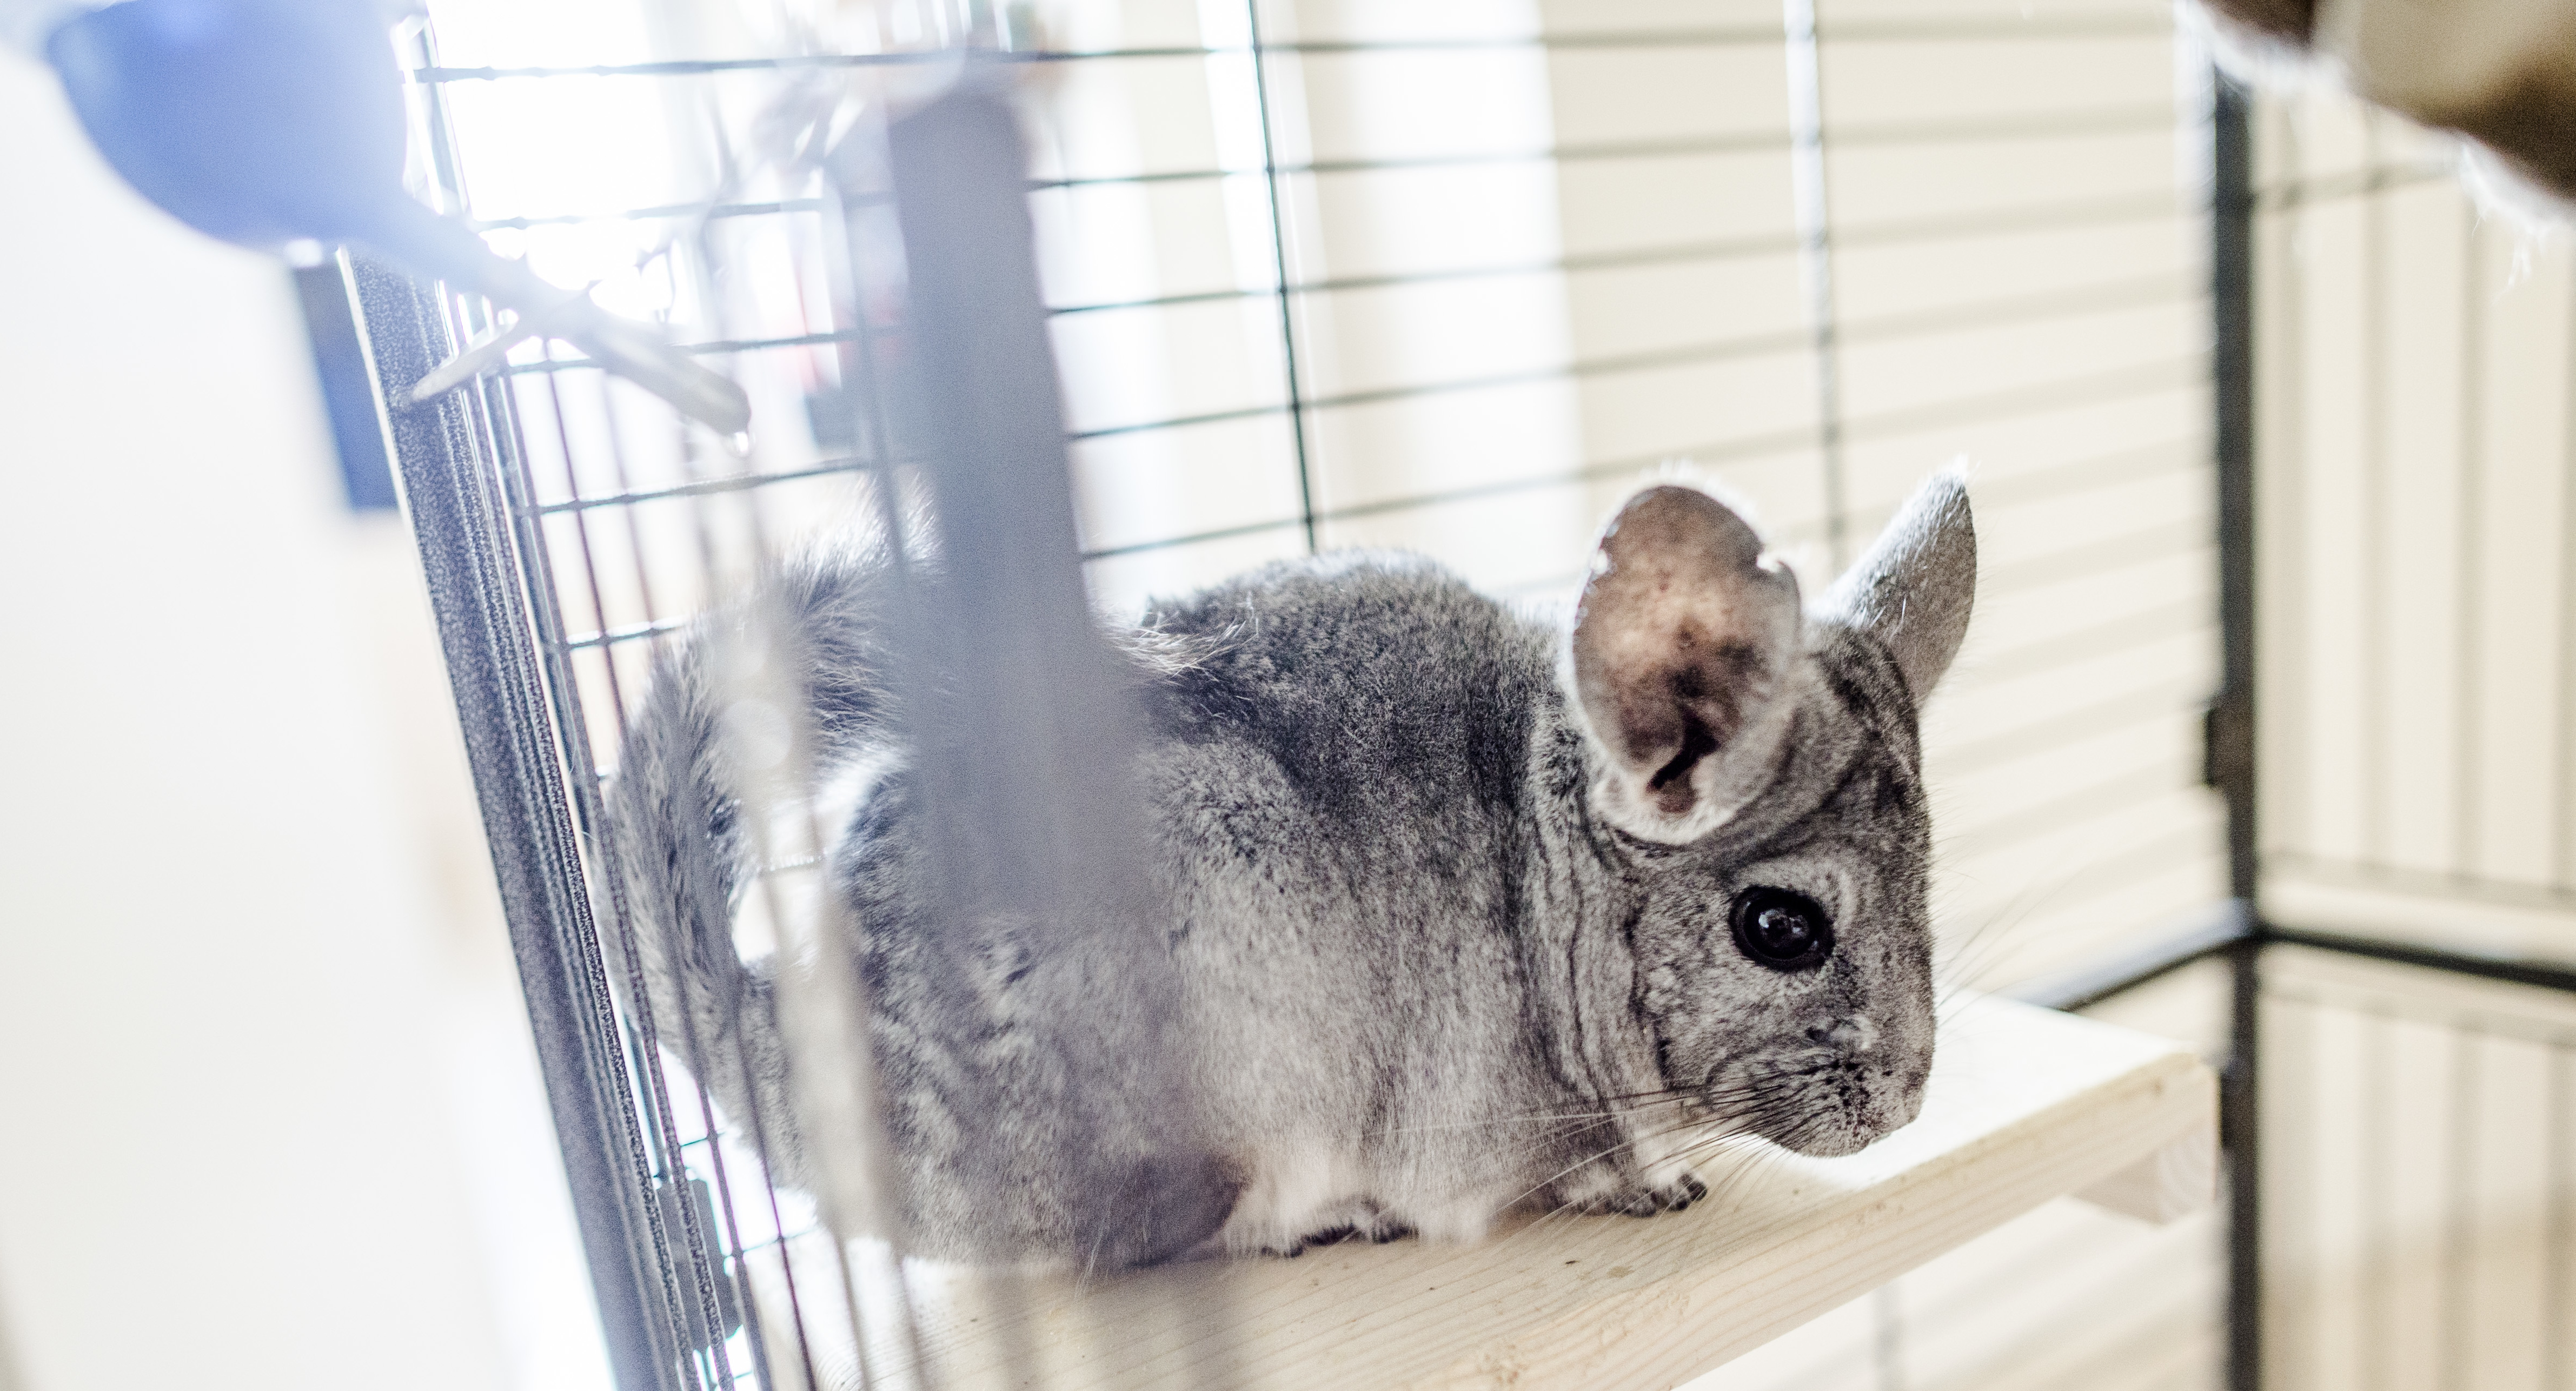 Chinchilla Sheila enjoys exploring her cage in her new home